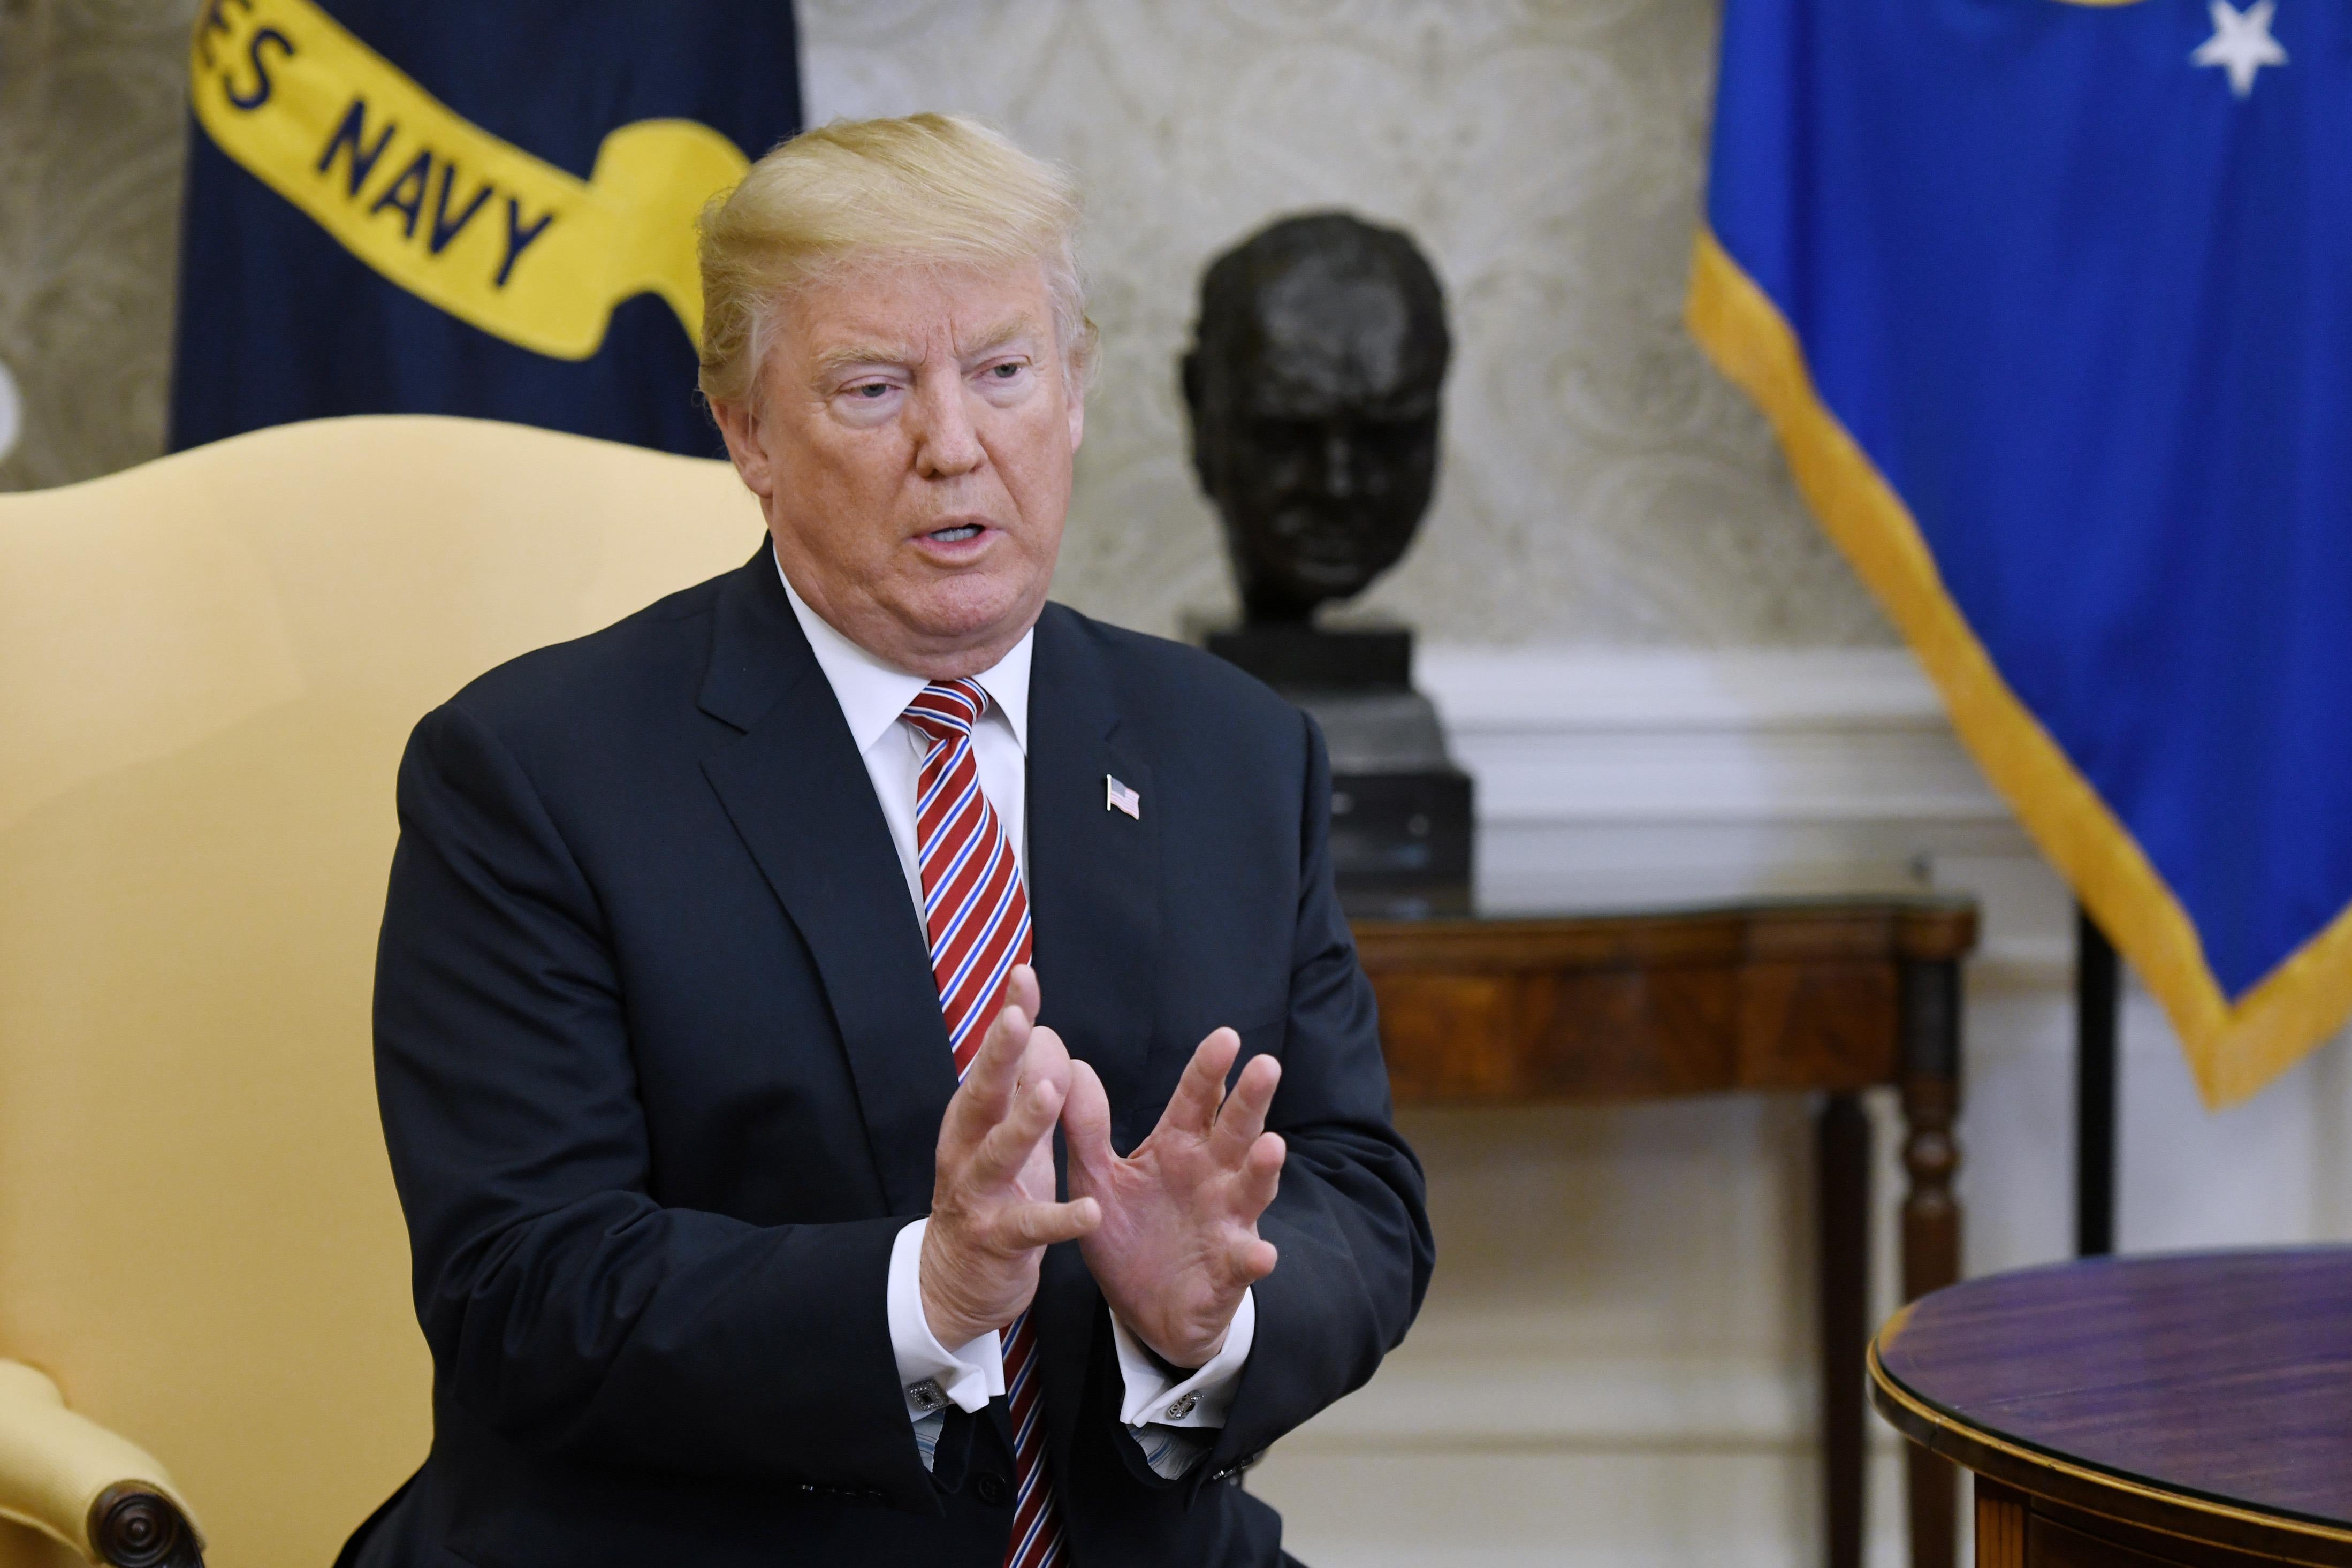 President Donald Trump speaks  in the Oval Office of the White House, February 9, 2018 in Washington, D.C.